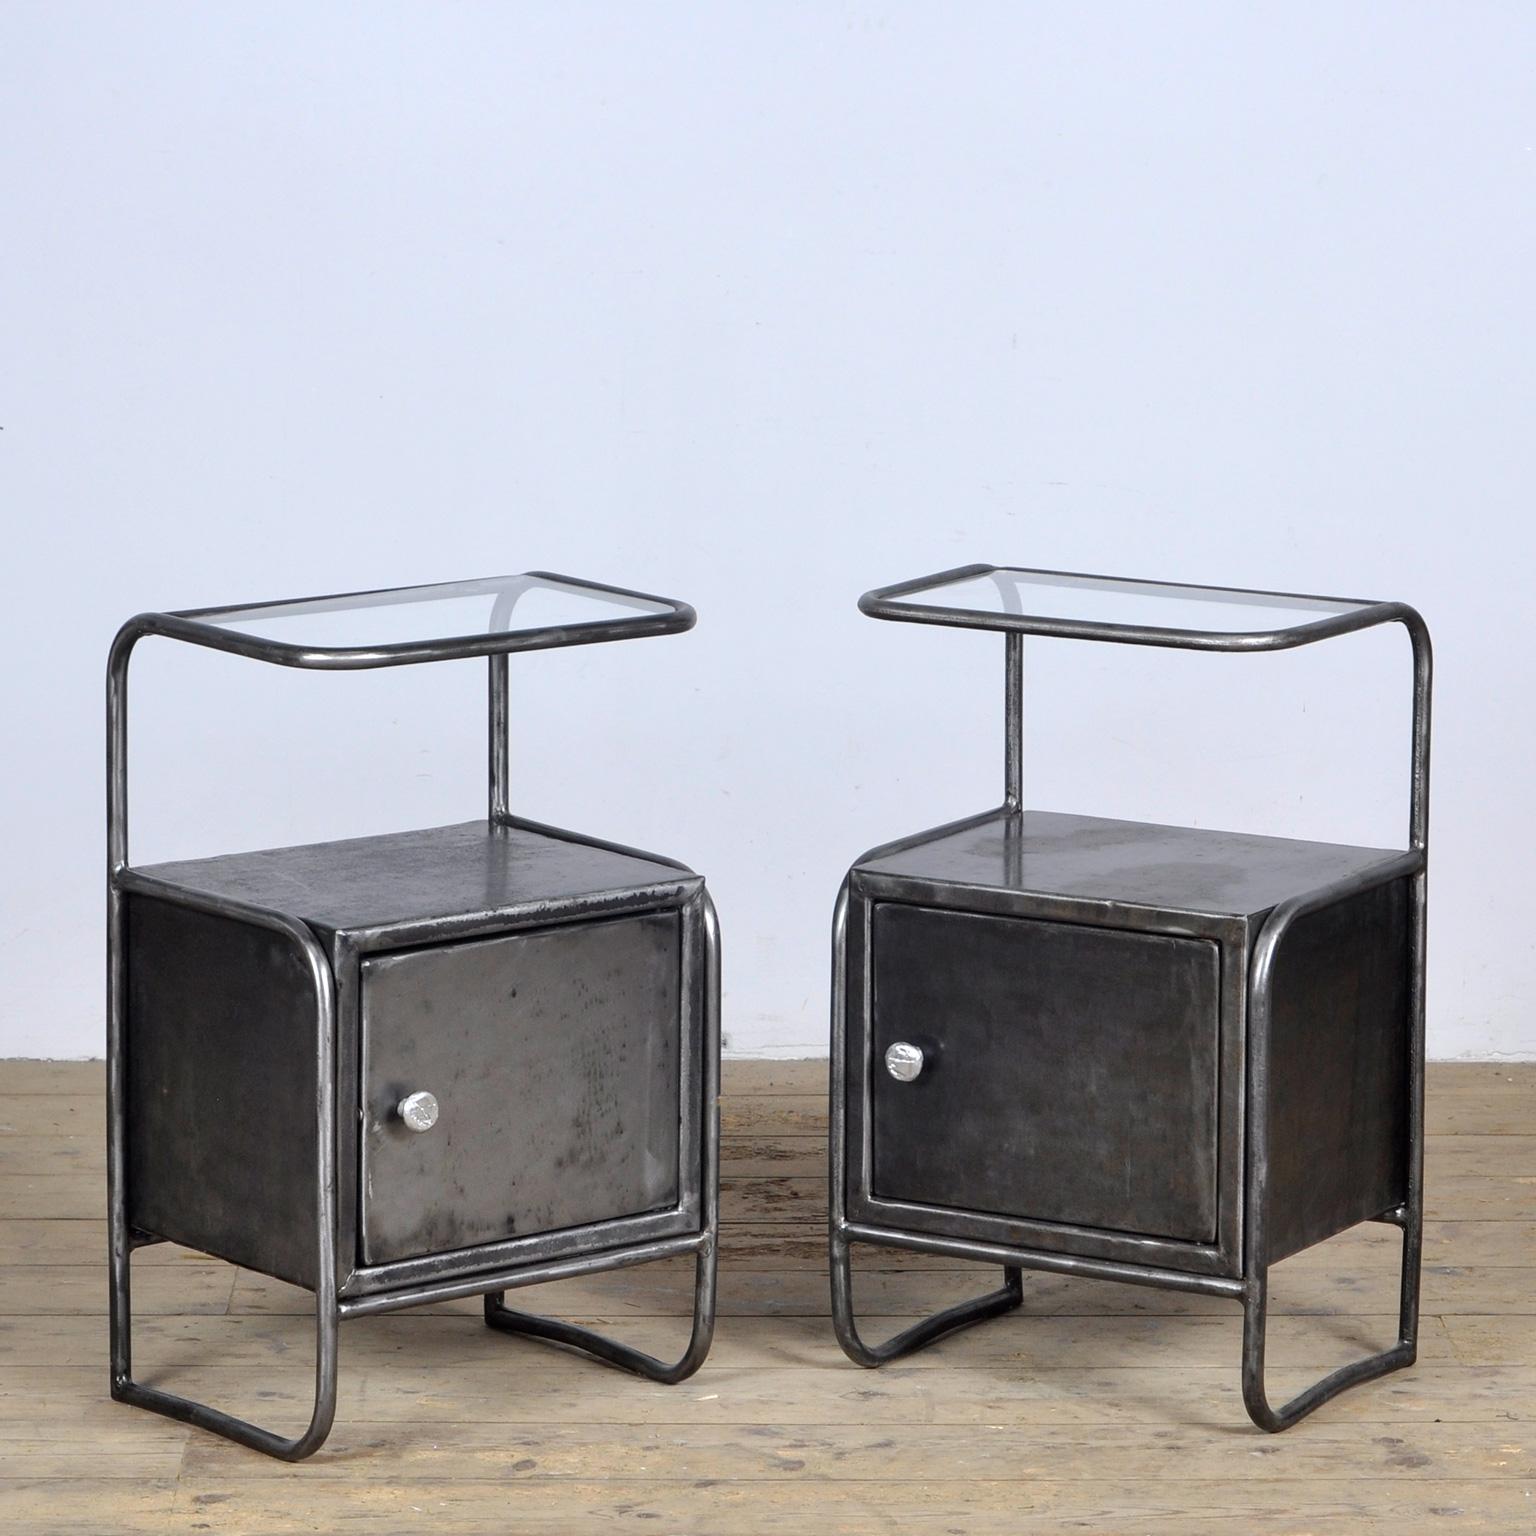 Set of iron bedside tables with a glass top, circa 1950. The cabinets originally came from a hospital. They have been stripped of the paint and polished. Treated against rust.